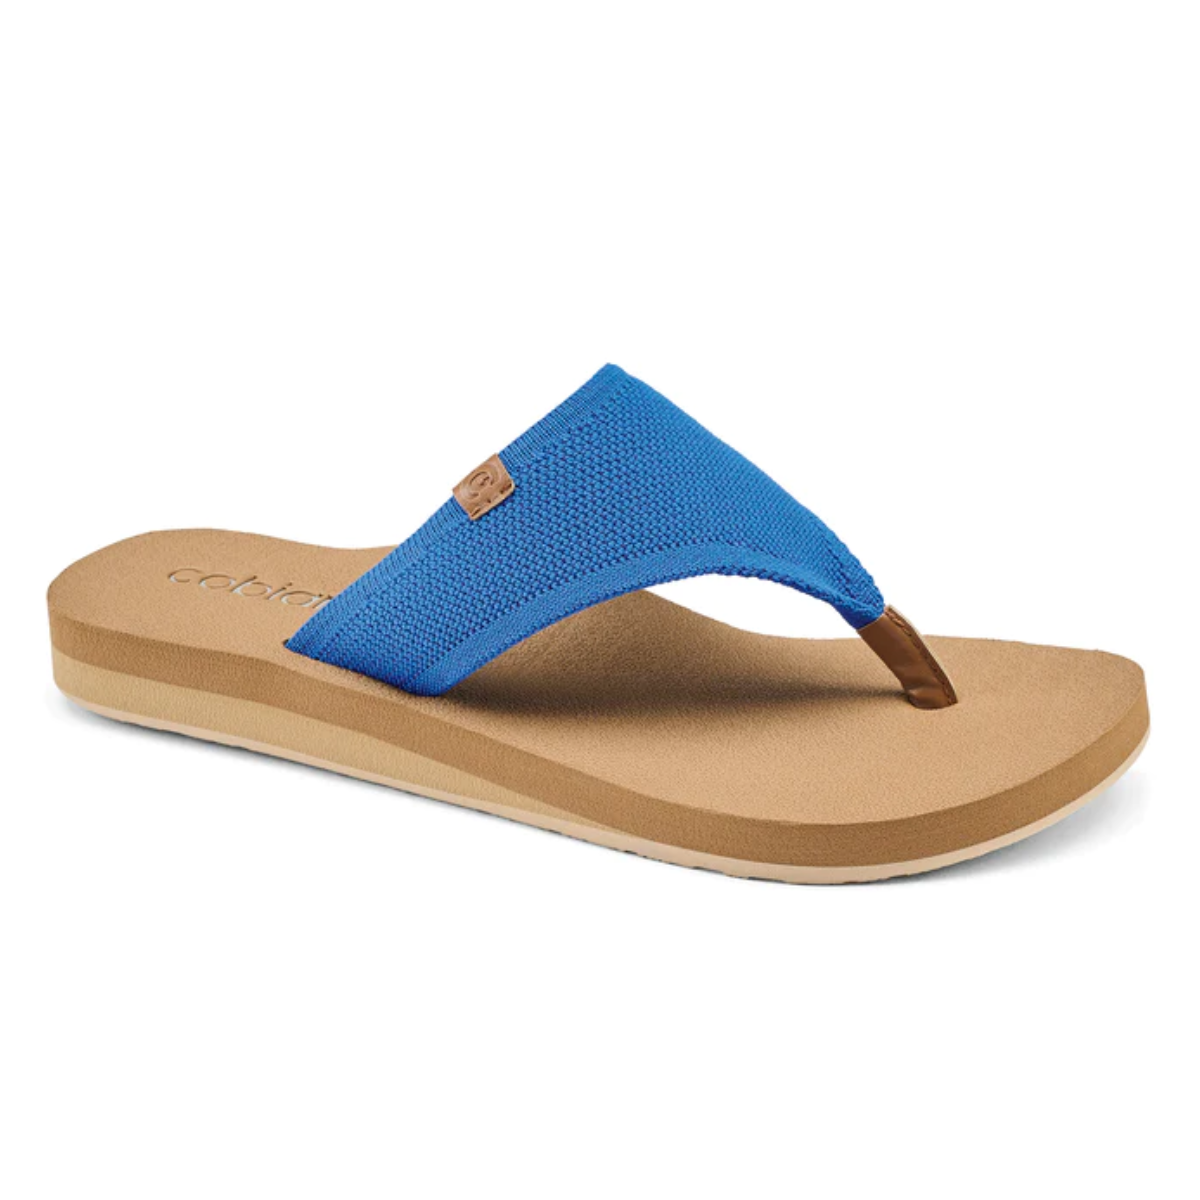 A women's Bermuda Bounce flip flop by COBIAN in Blue with a cushioned footbed.